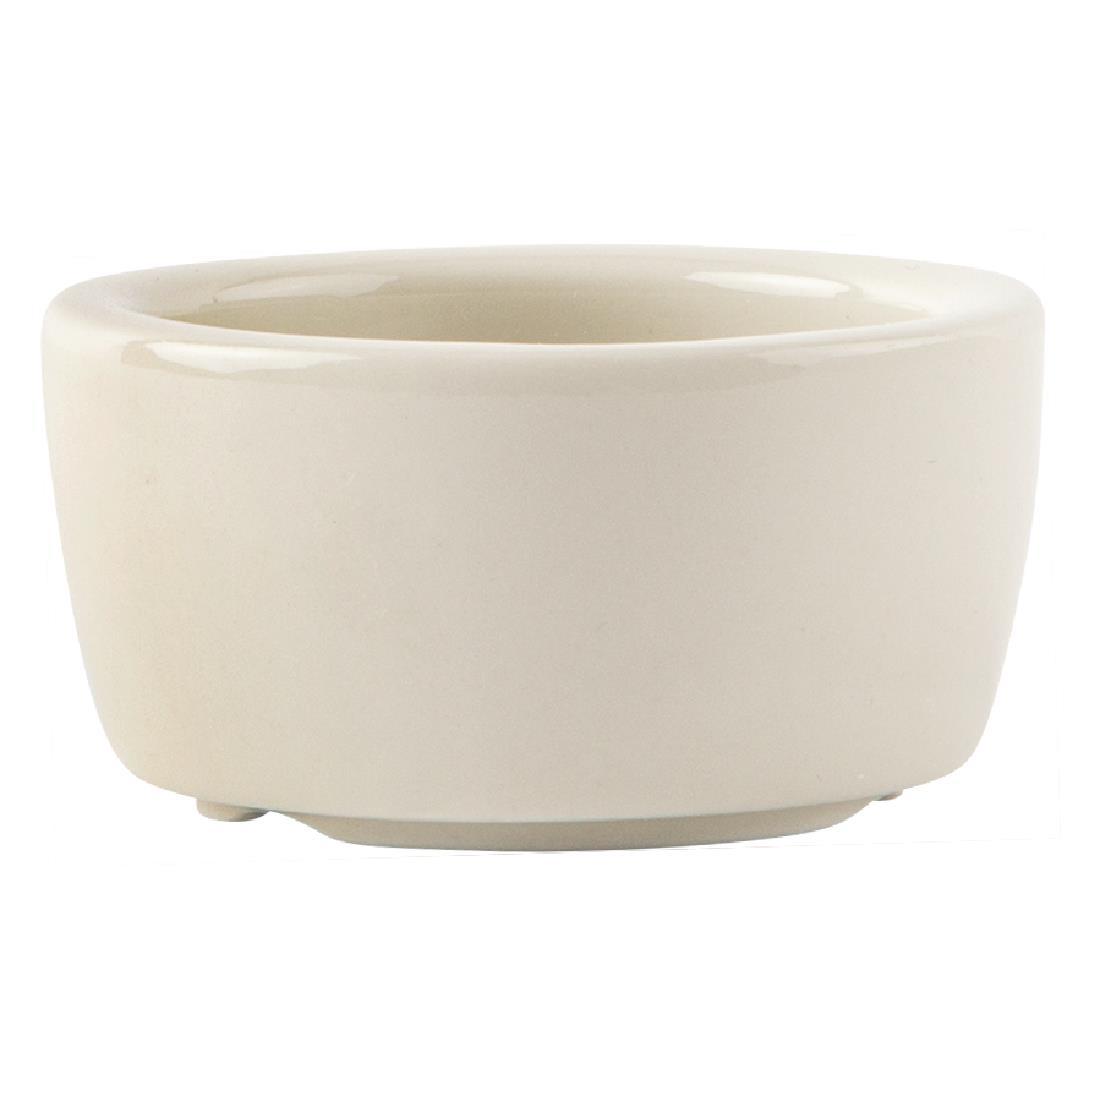 Olympia Ivory Butter Dish 56mm (Pack of 12) - U151  - 3